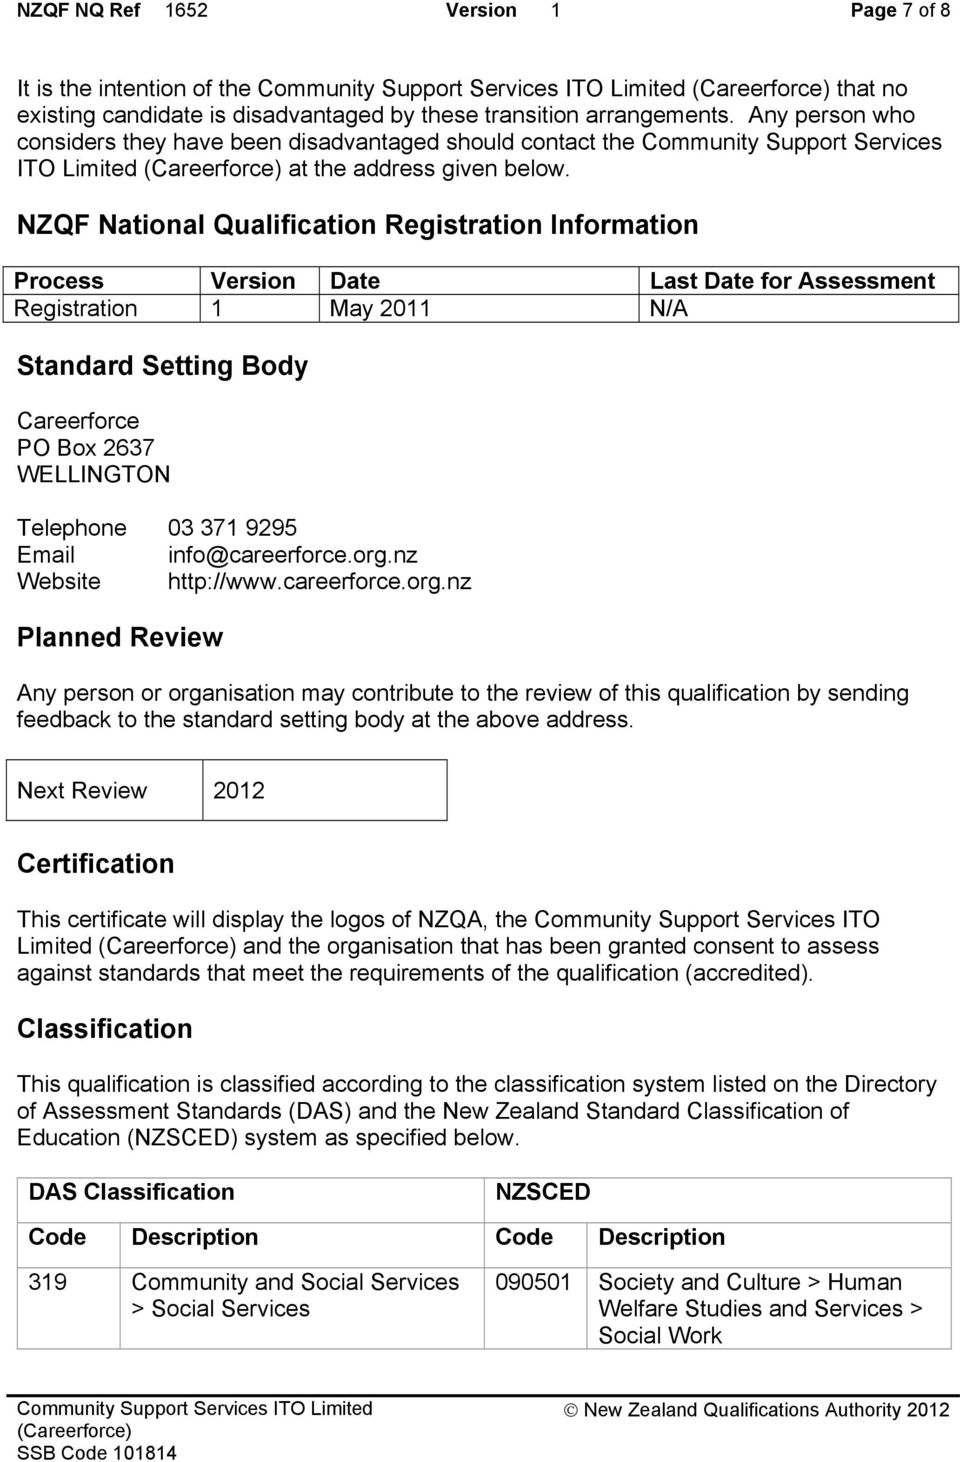 NZQF National Qualification Registration Information Process Version Date Last Date for Assessment Registration 1 May 2011 N/A Standard Setting Body Careerforce PO Box 2637 WELLINGTON Telephone 03